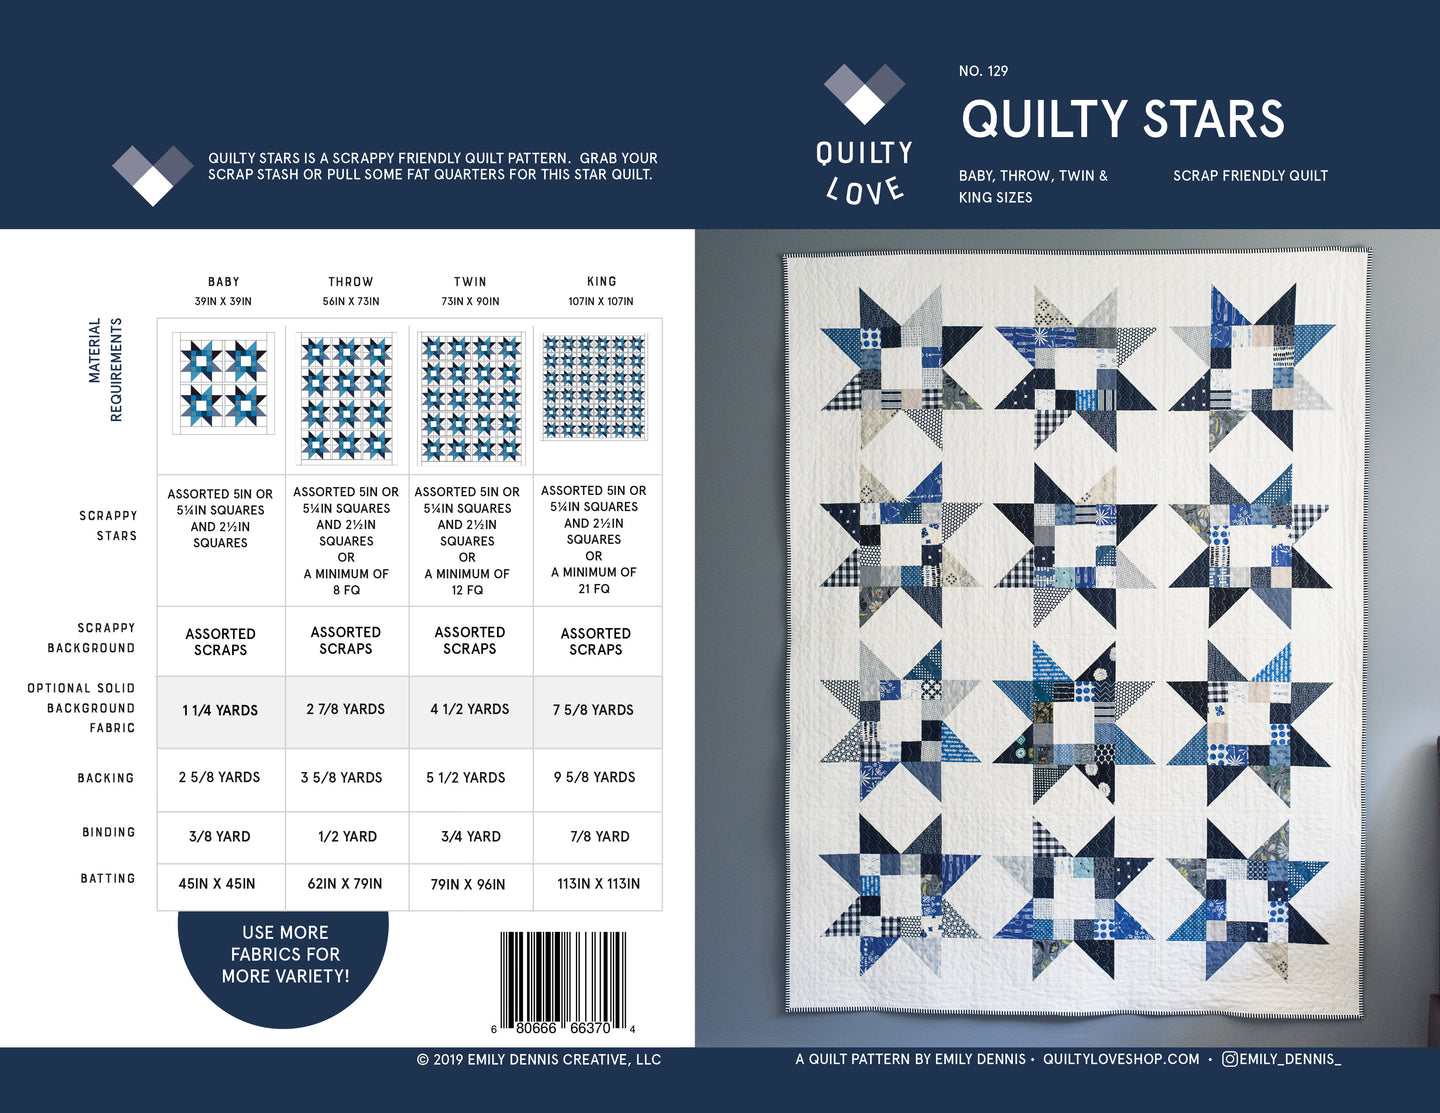 Bestseller Star Bundle Night Stars Quilty Stars And Expanding